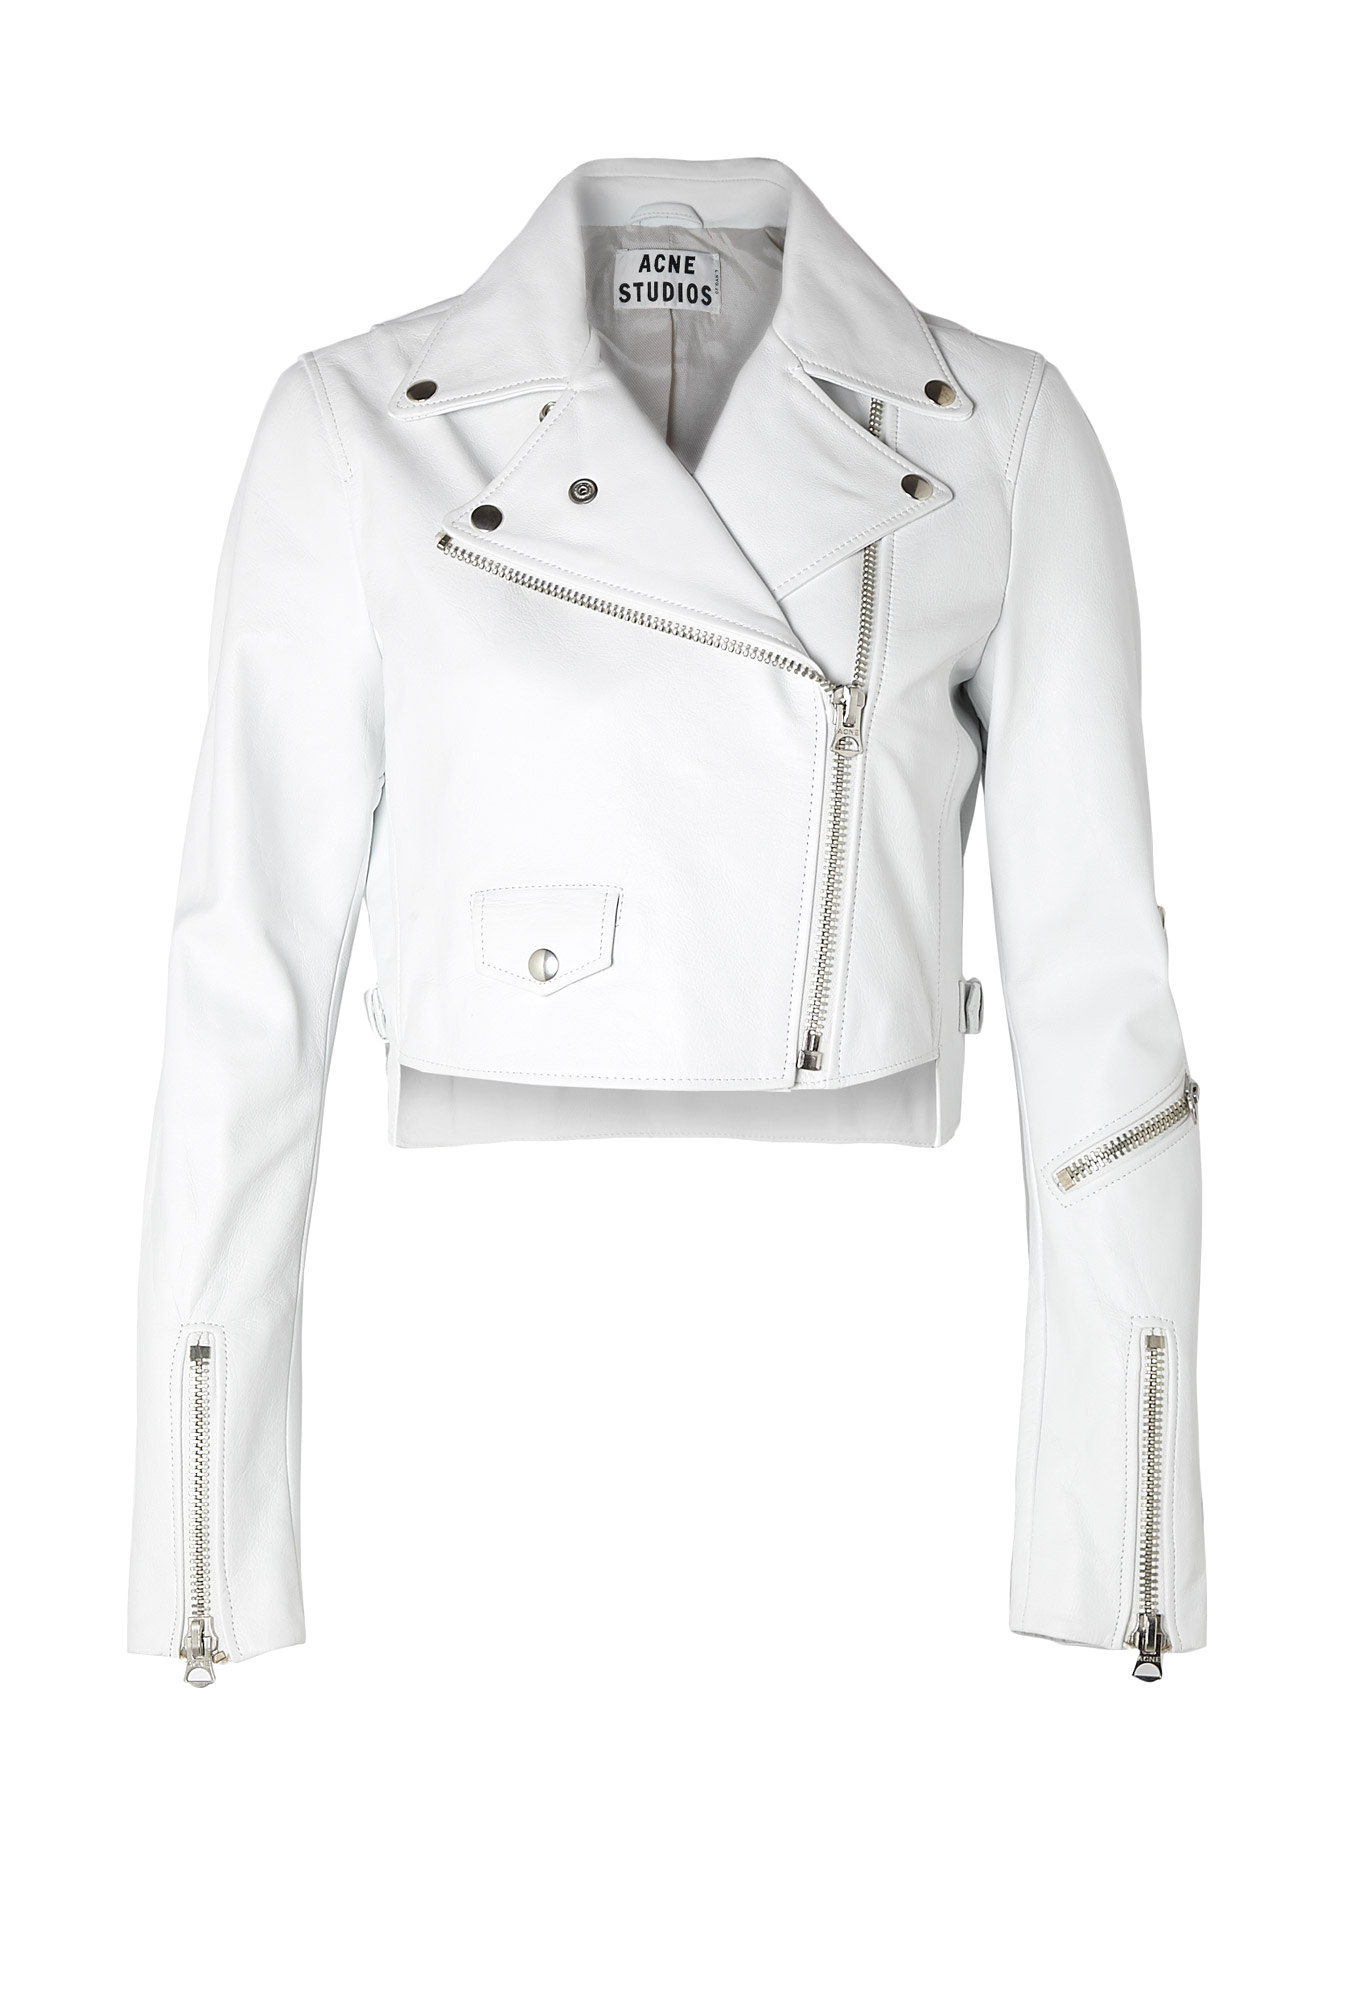 Acne Studios White Cropped Leather Biker Jacket in White (ice) | Lyst